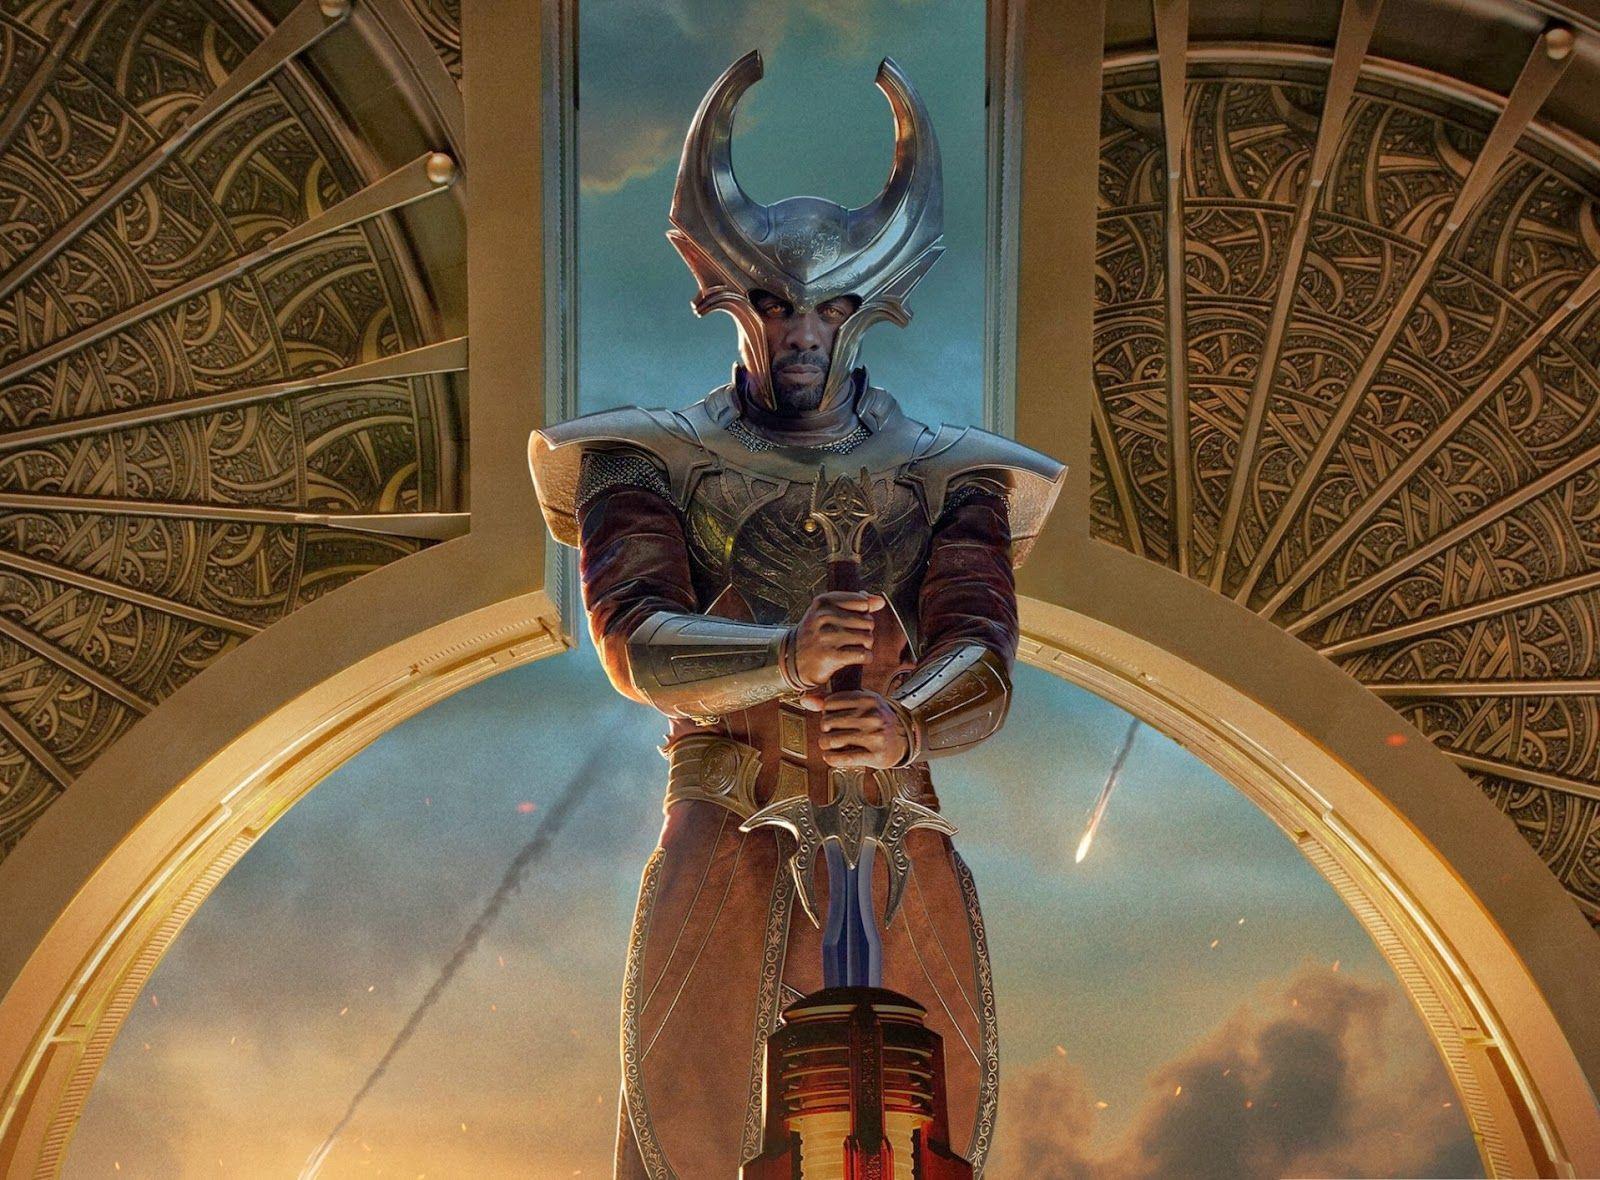 donload heimdall tar.gz for one click